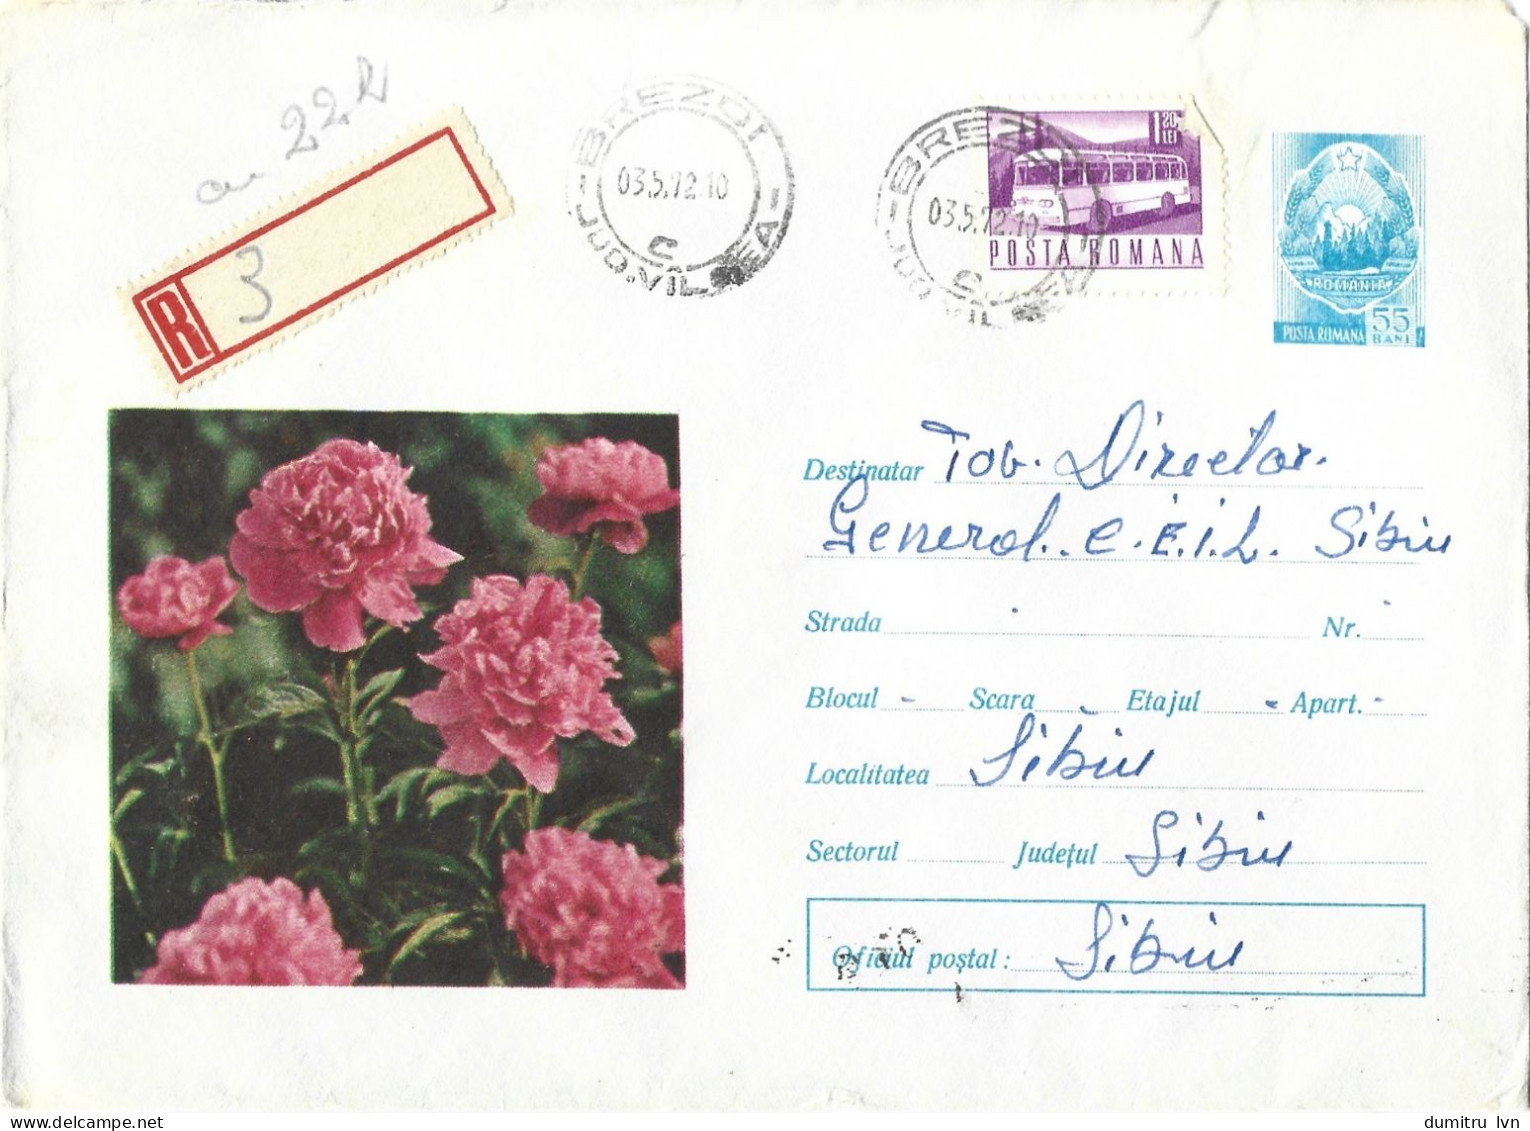 ROMANIA 1972 PEONY, CIRCULATED ENVELOPE, COVER STATIONERY - Ganzsachen